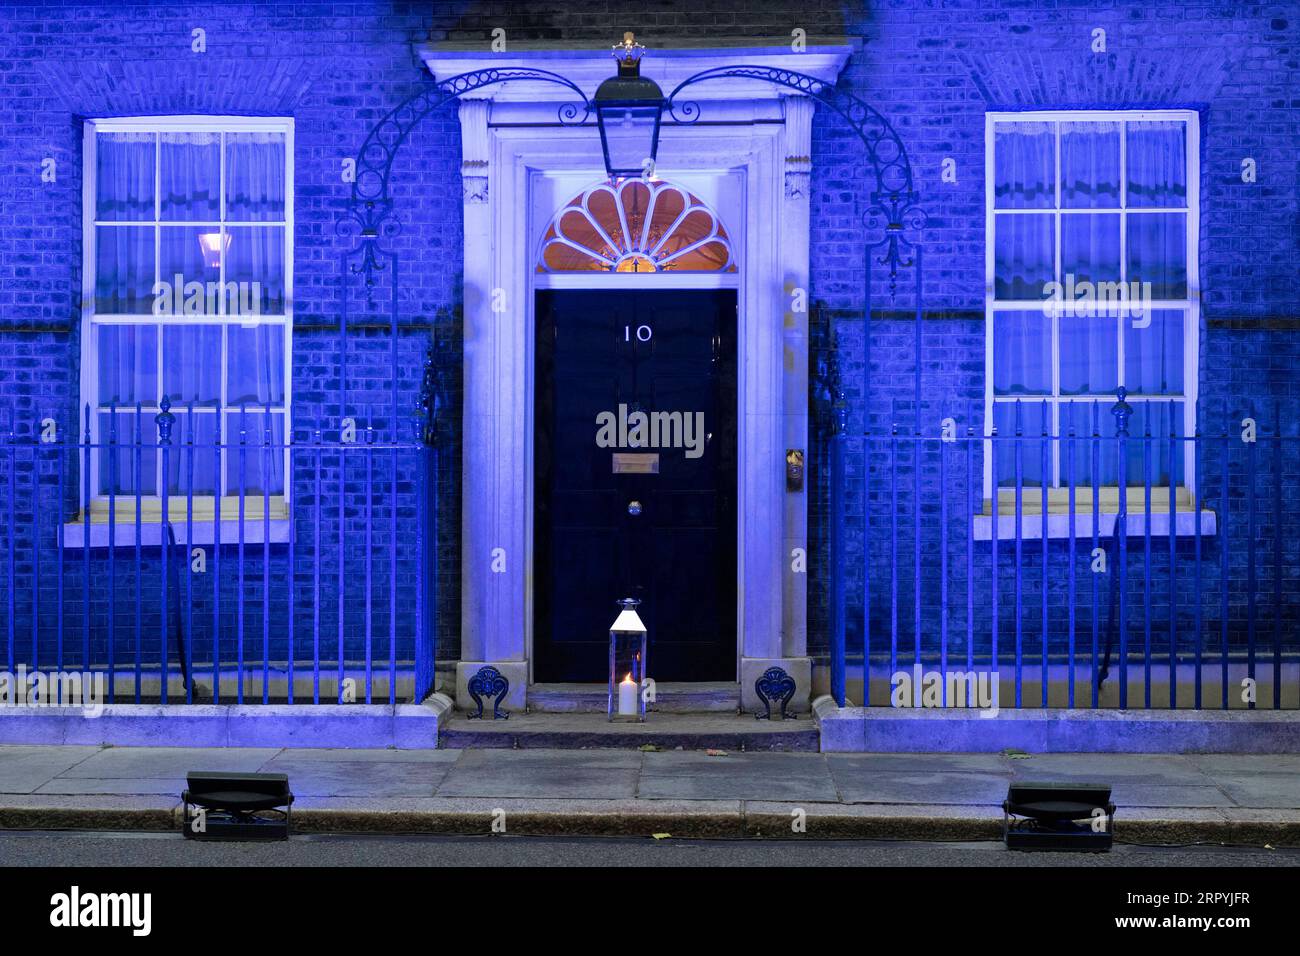 200705 -- LONDON, July 5, 2020 Xinhua -- A candle is placed at the front of Downing Street as the building is lit up blue to mark the 72nd anniversary of the National Health Service NHS in London, Britain on July 4, 2020. According to local media, dozens of landmarks across the country were lit up blue to mark 72 years since the founding of the NHS. Photo by Ray Tang/Xinhua BRITAIN-LONDON-LANDMARKS-LIT BLUE-NHS-72ND ANNIVERSARY PUBLICATIONxNOTxINxCHN Stock Photo